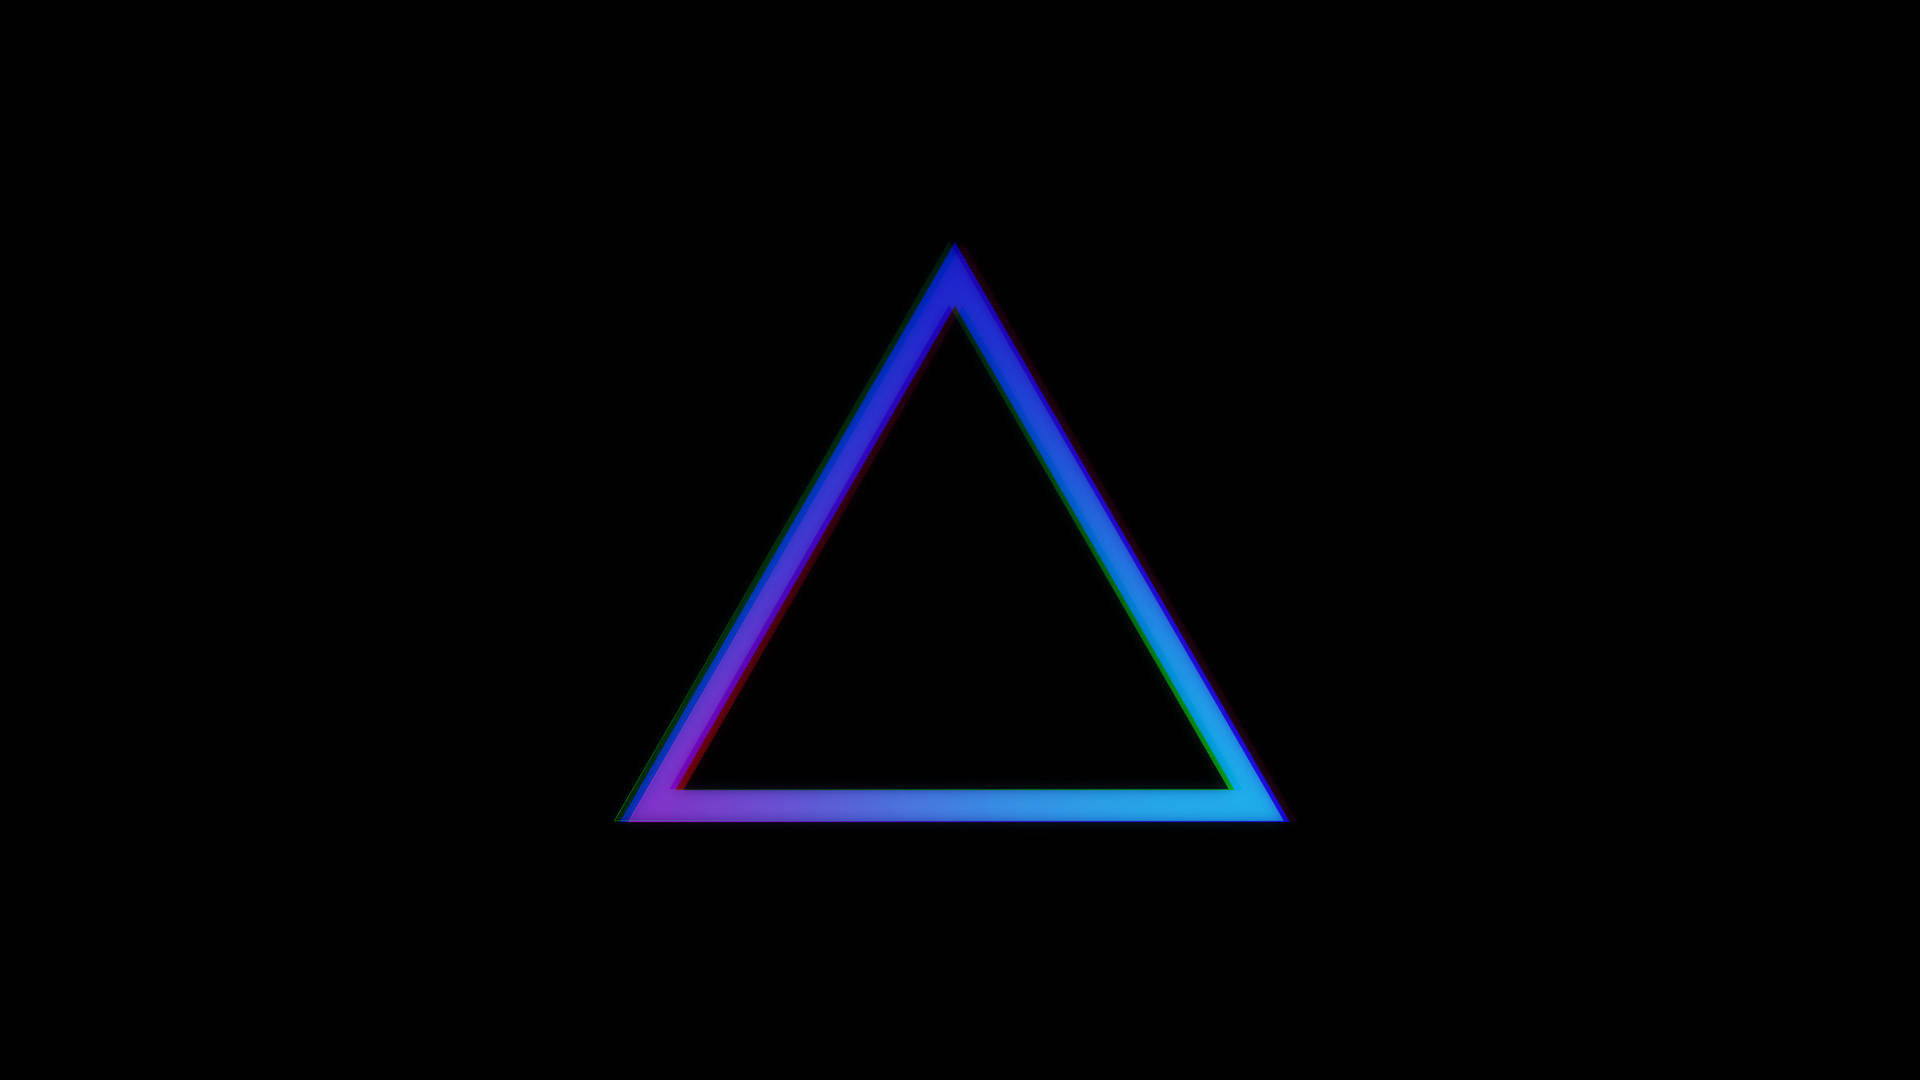 Minimalist Blue Equilateral Triangle Wallpaper